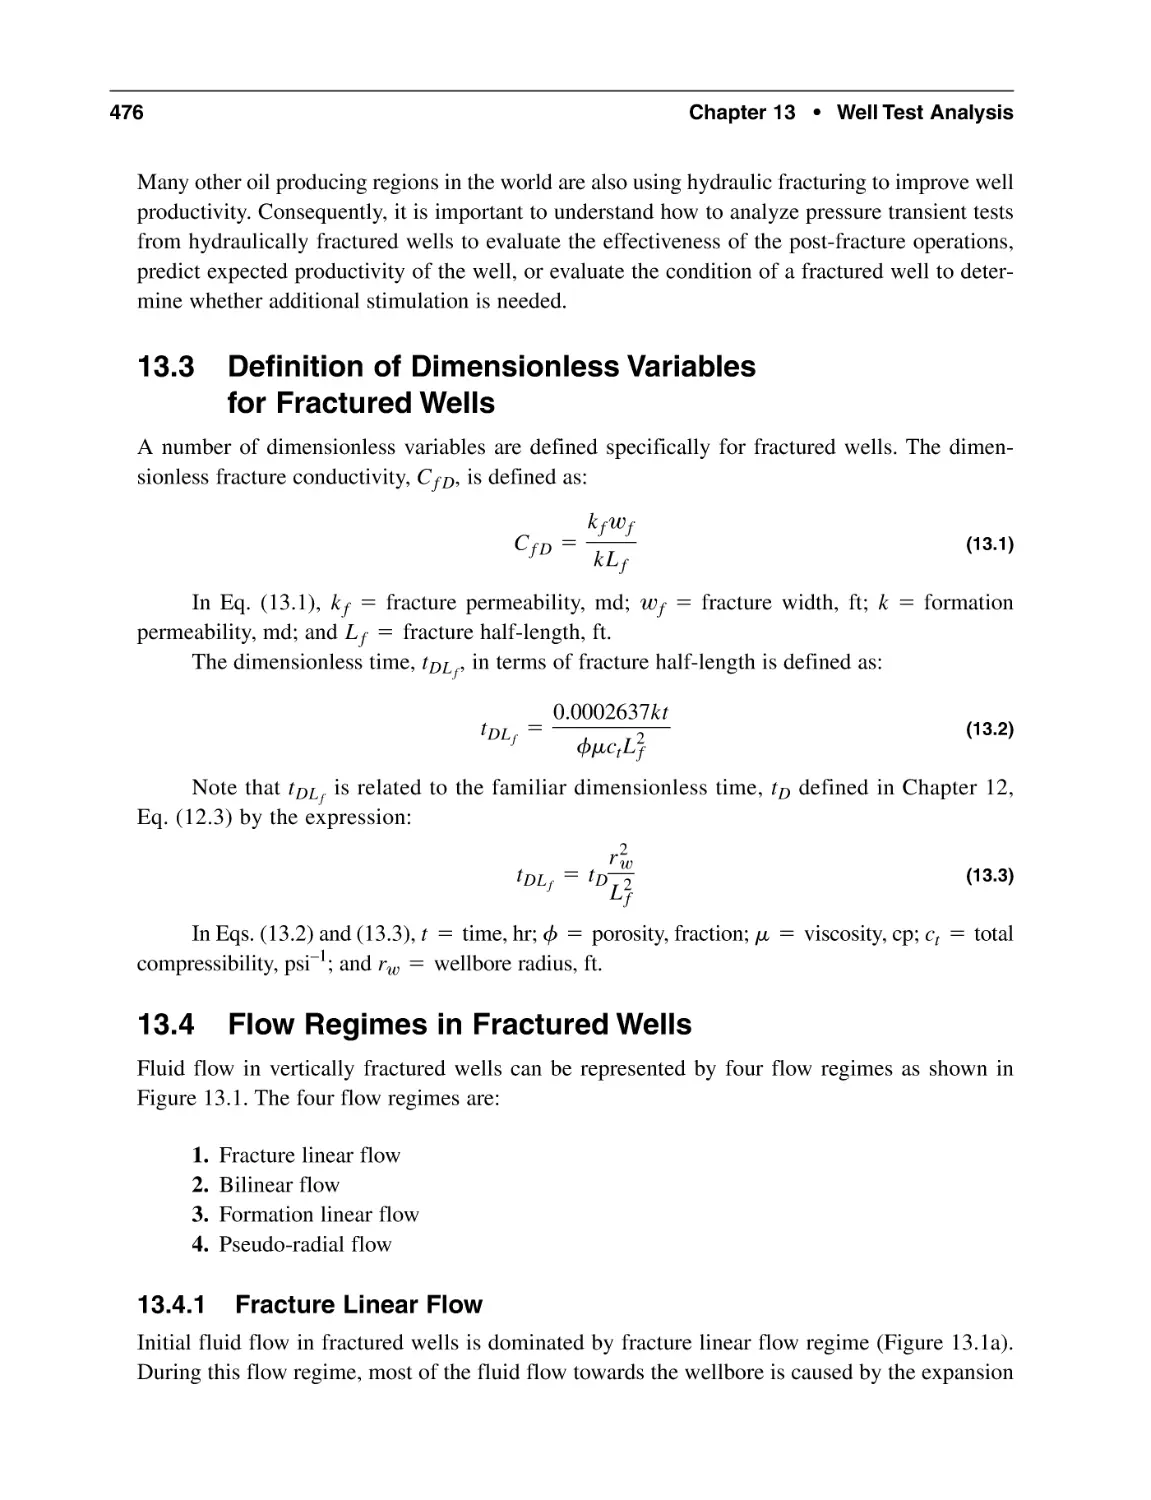 13.3 Definition of Dimensionless Variables for Fractured Wells
13.4 Flow Regimes in Fractured Wells
13.4.1 Fracture Linear Flow